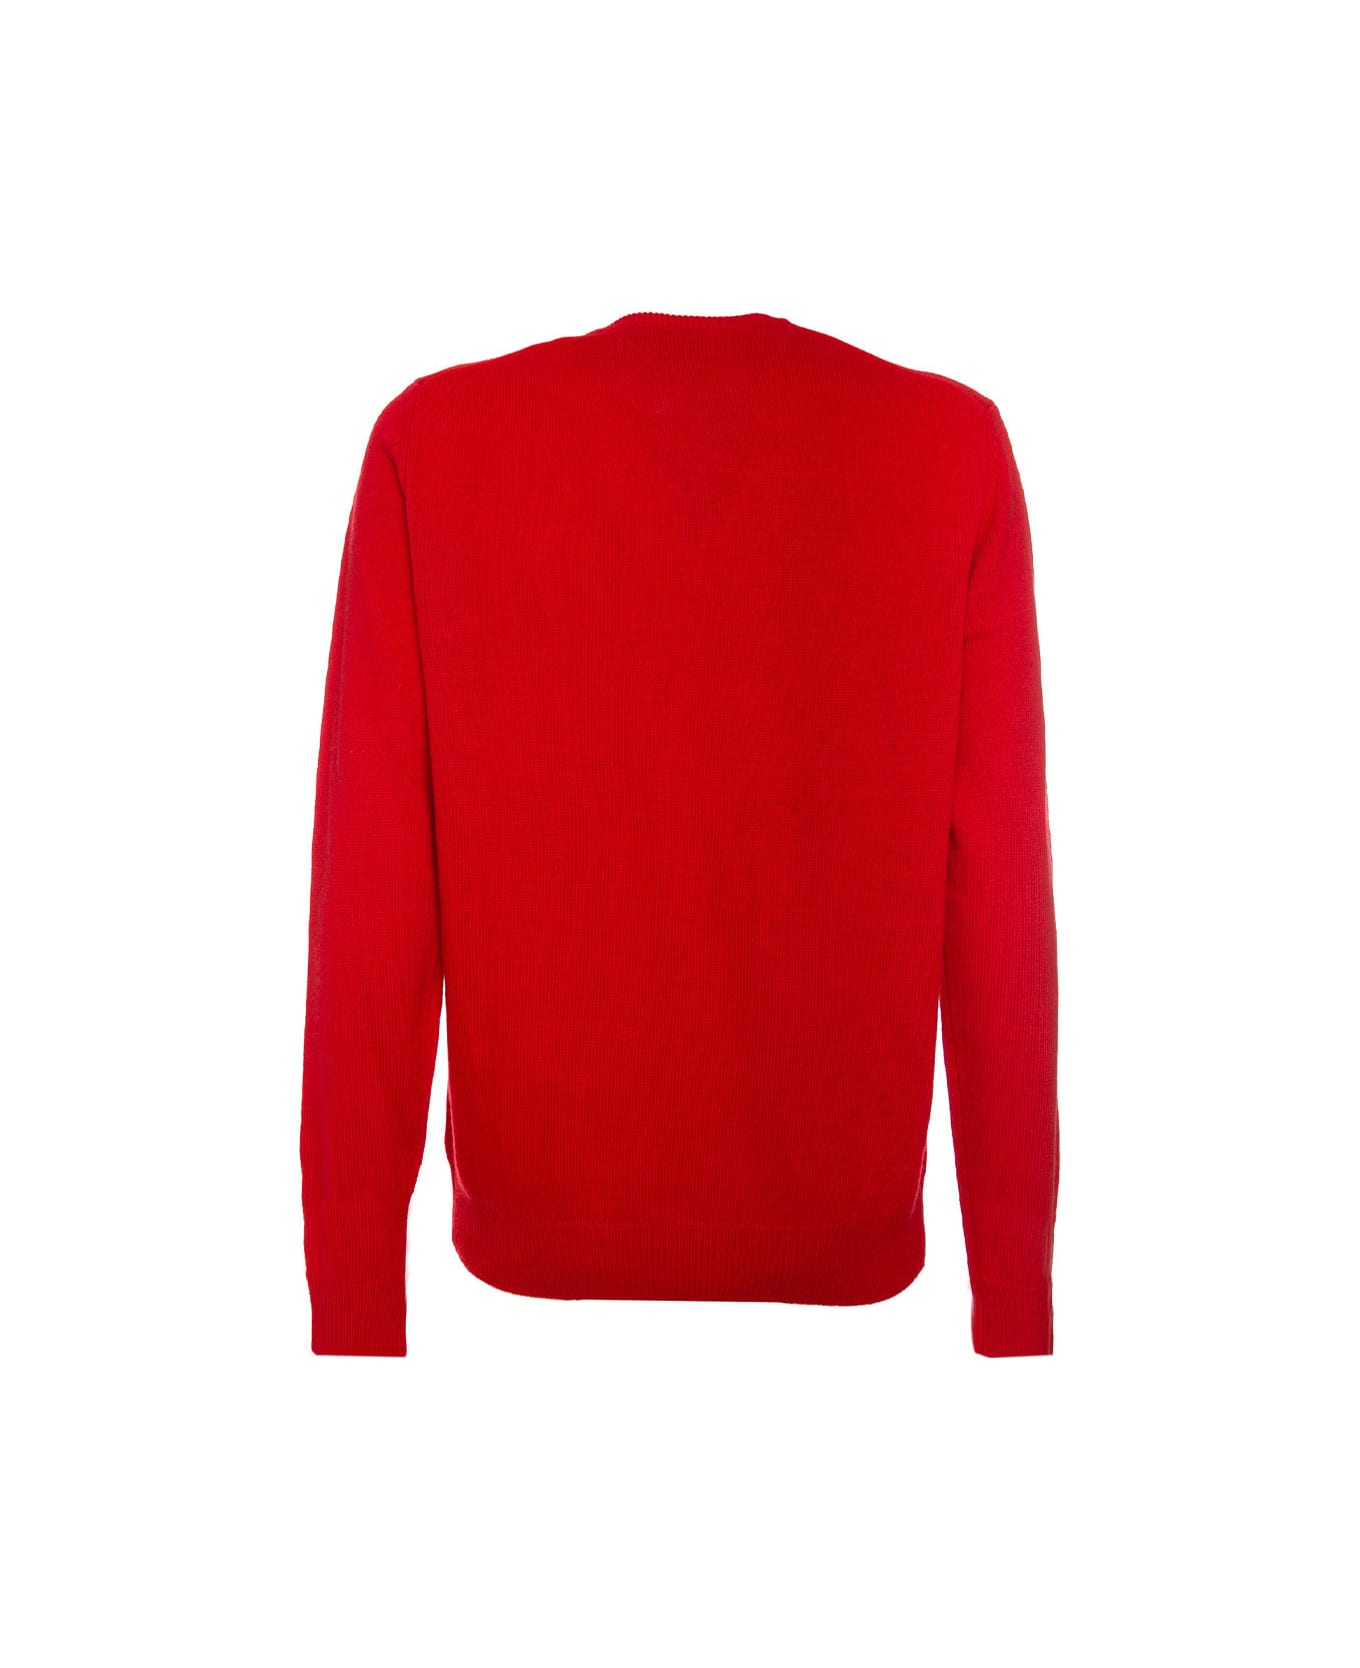 MC2 Saint Barth Man Sweater Christmas Snoopy | Peanuts Special Edition - RED